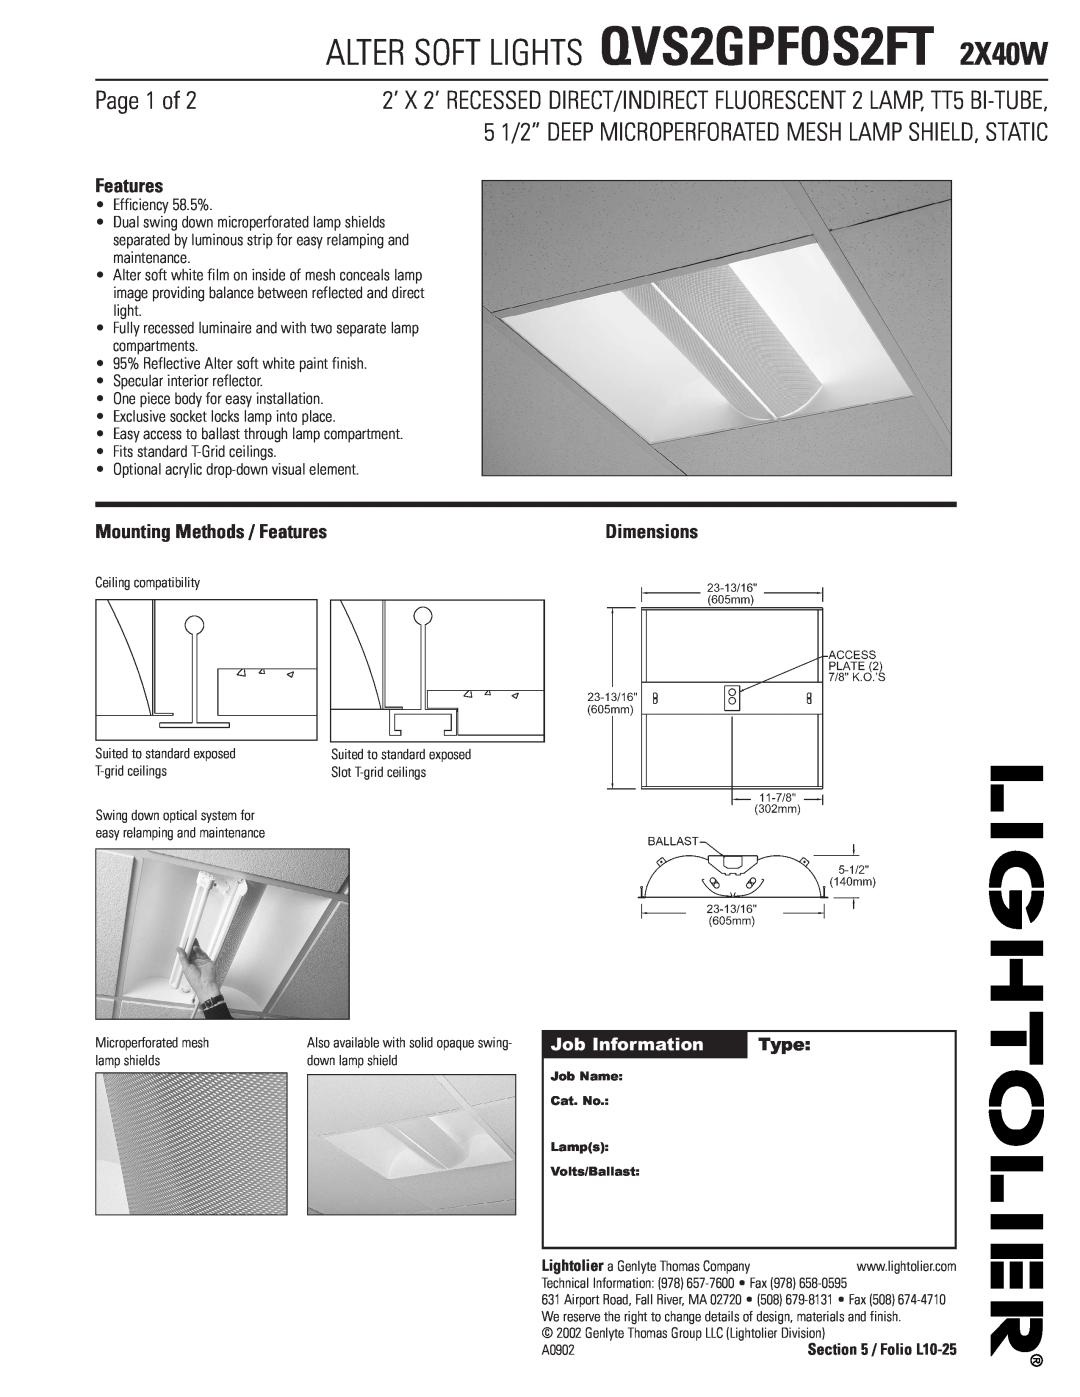 Lightolier dimensions Job Information, ALTER SOFT LIGHTS QVS2GPFOS2FT 2X40W, Page 1 of, Features, Type, Dimensions 